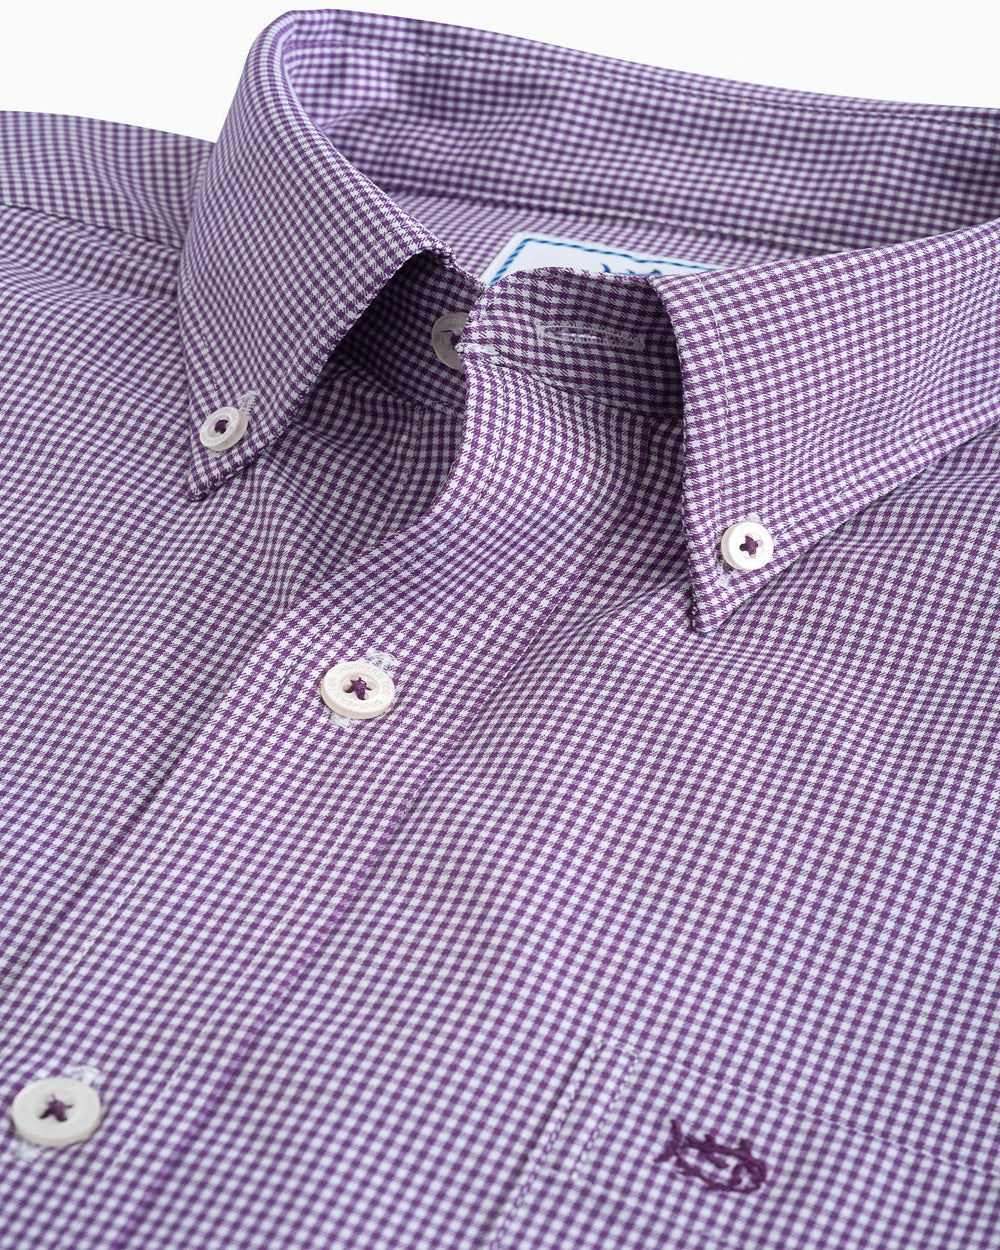 The collar of the Men's Purple Micro Gingham Intercoastal Performance Sport Shirt by Southern Tide - royal purple